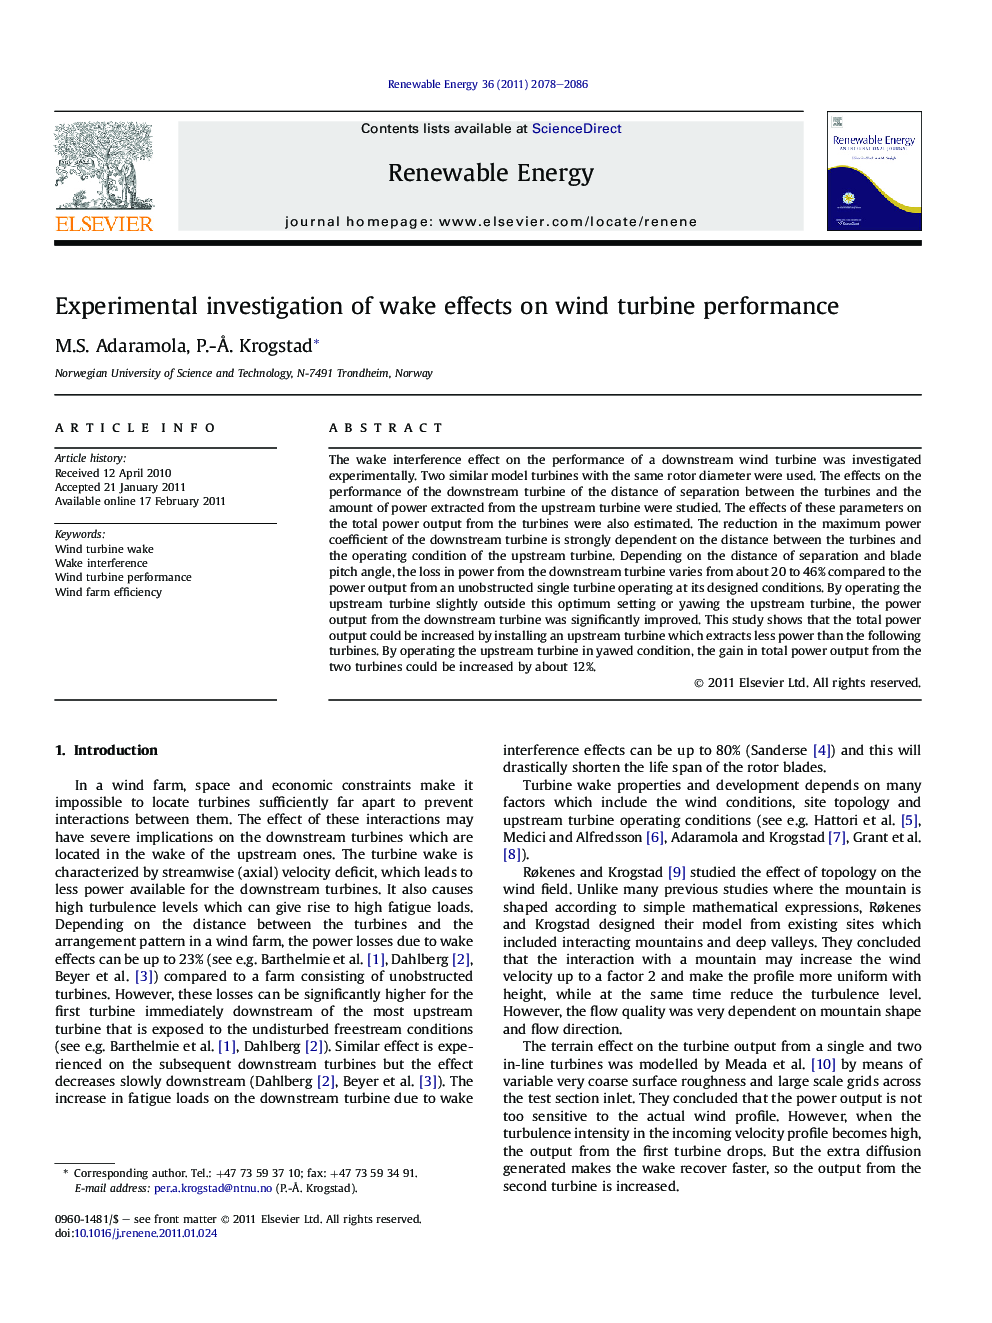 Experimental investigation of wake effects on wind turbine performance